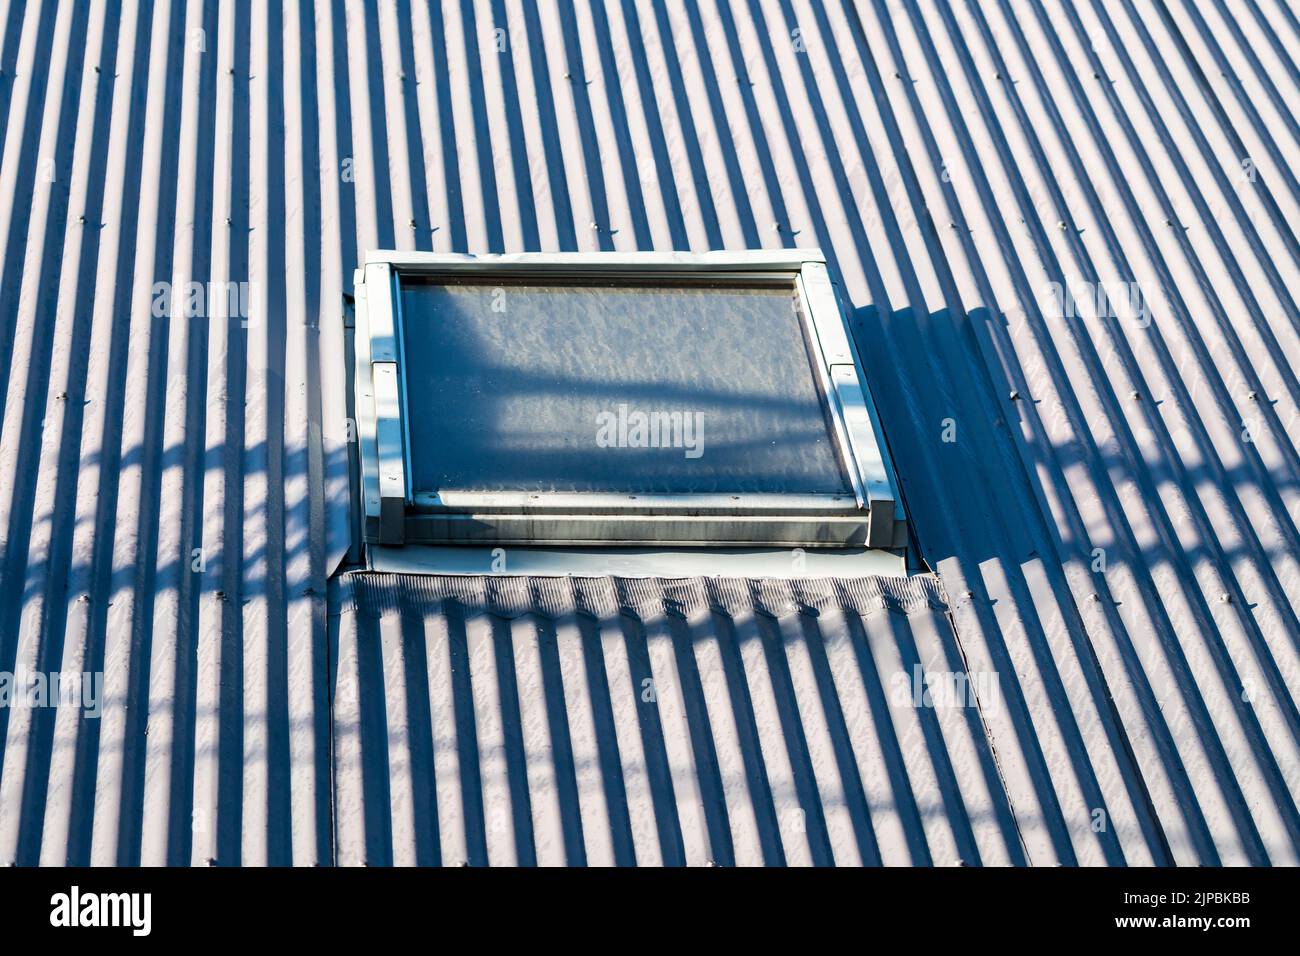 skylight or sky light window in a corrugated metal roof to let light in to a dark area of a building concept architectural element Stock Photo